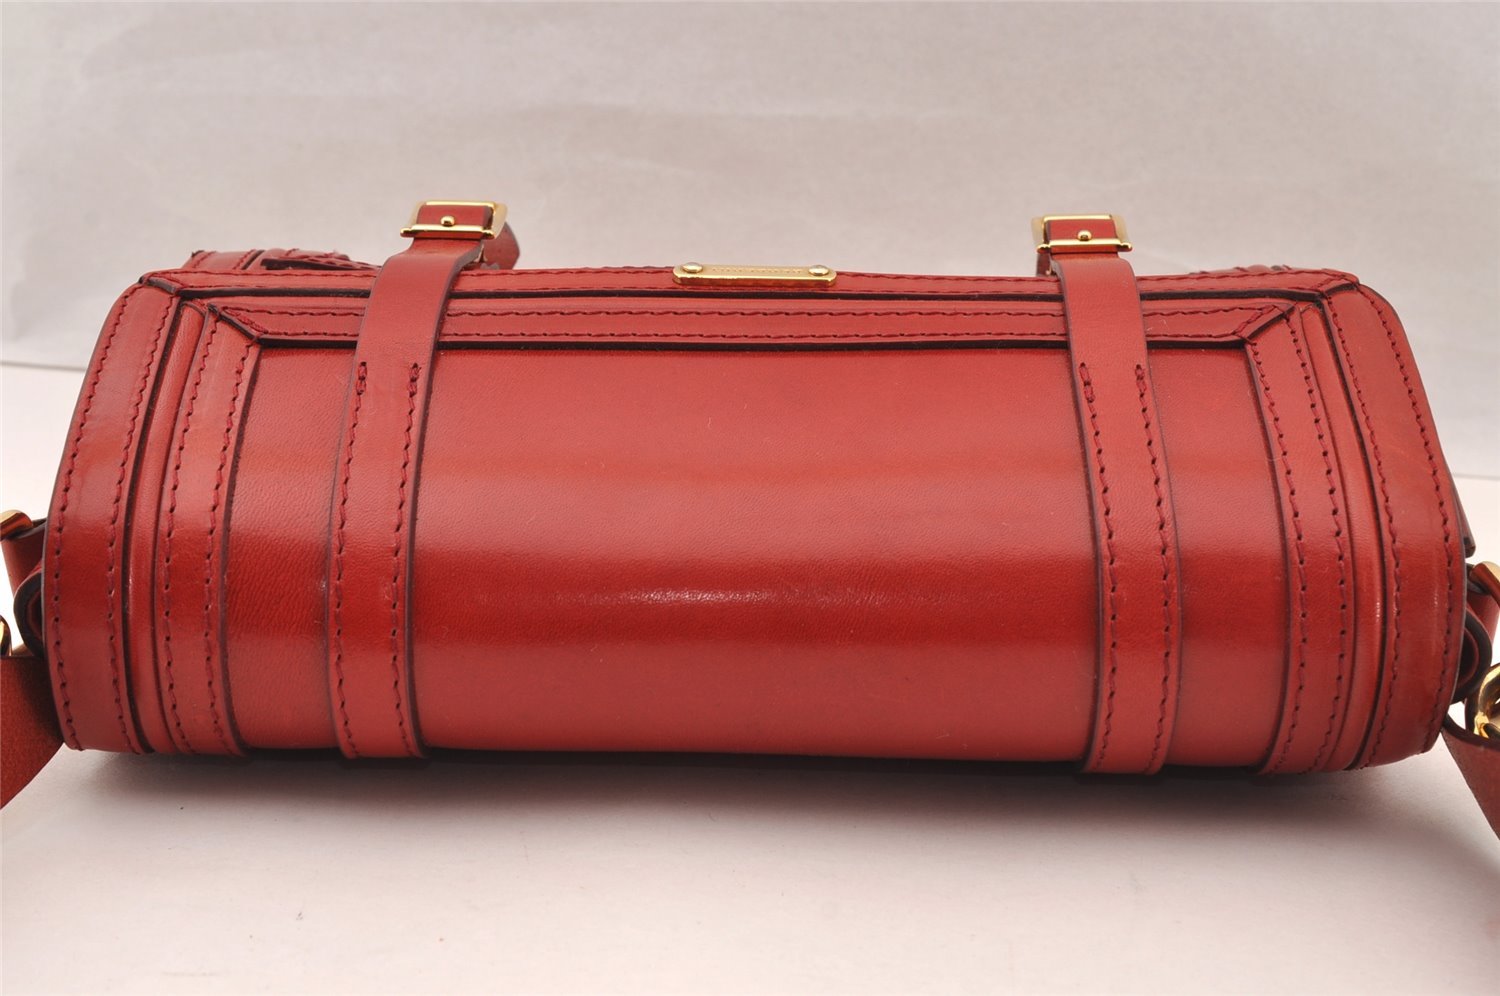 Authentic BURBERRY Vintage Leather Shoulder Cross Body Bag Purse Red 4696I